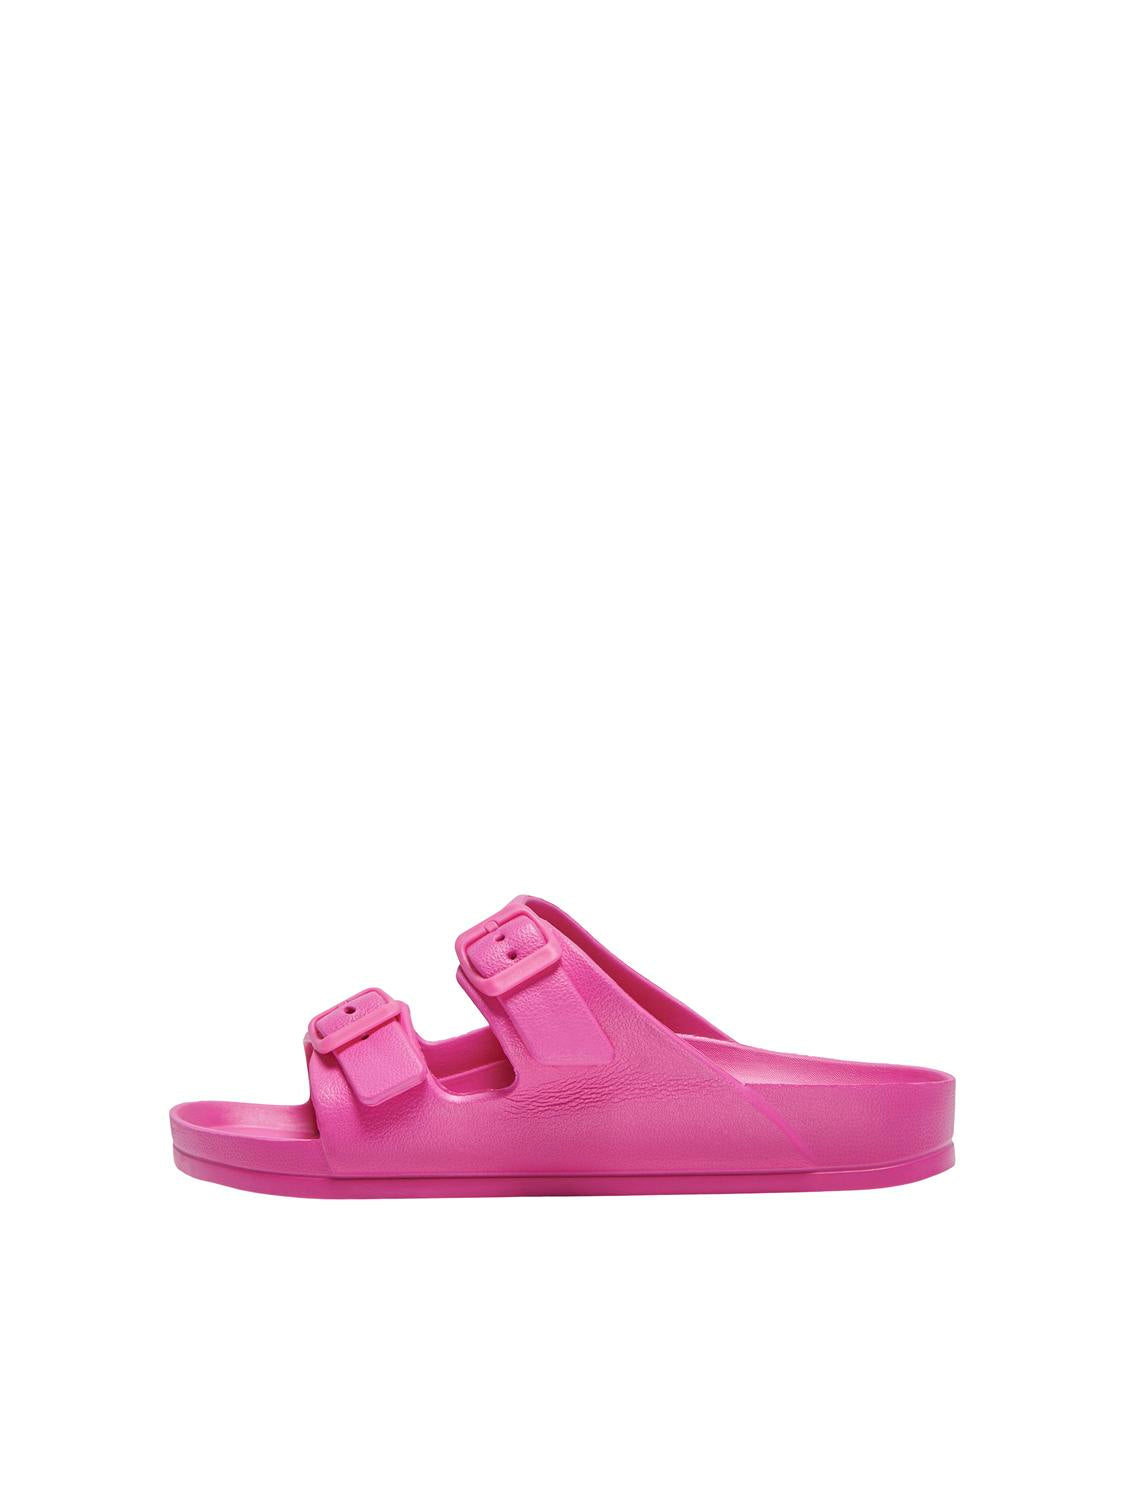 Pink double strap sandals